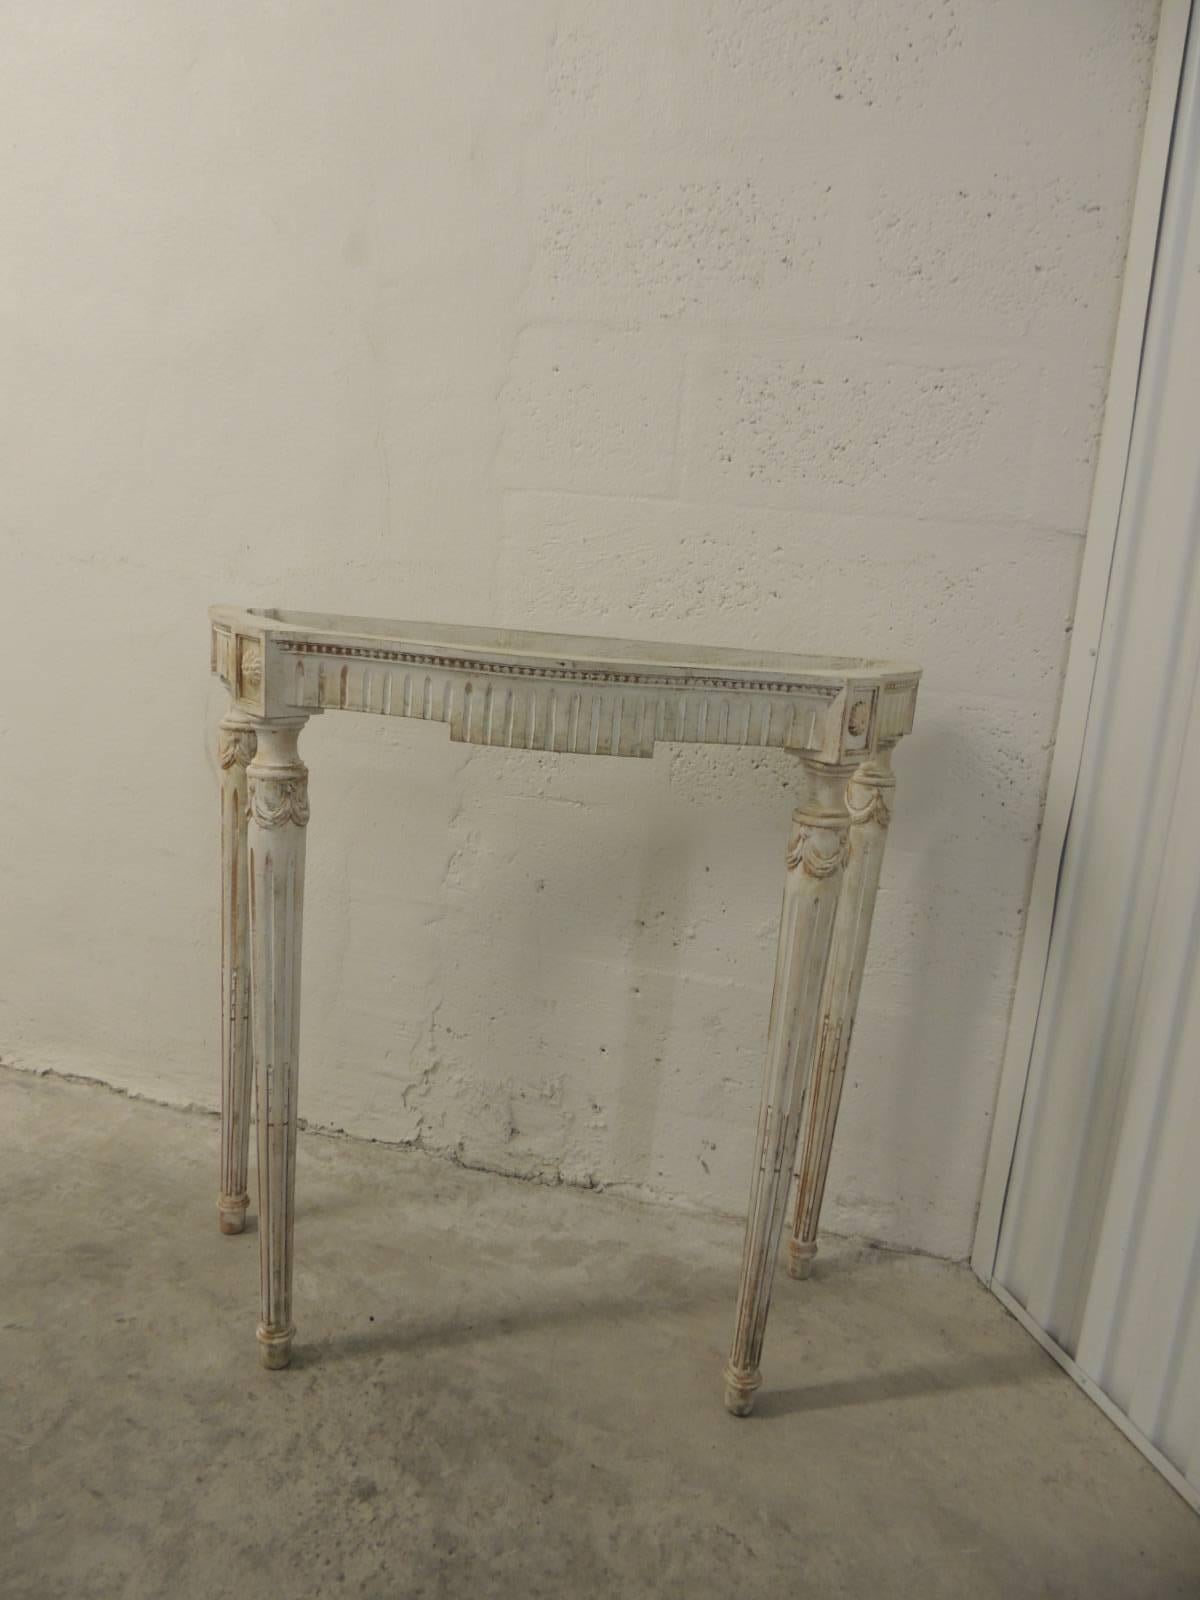 Painted white vintage consoles with fluted legs and orange undertones.
White serpentine legs vintage console with carved rosettes, fluted legs carved with garlands and ropes on the chalky painted vintage pieces legs.
Note: No top available, just the